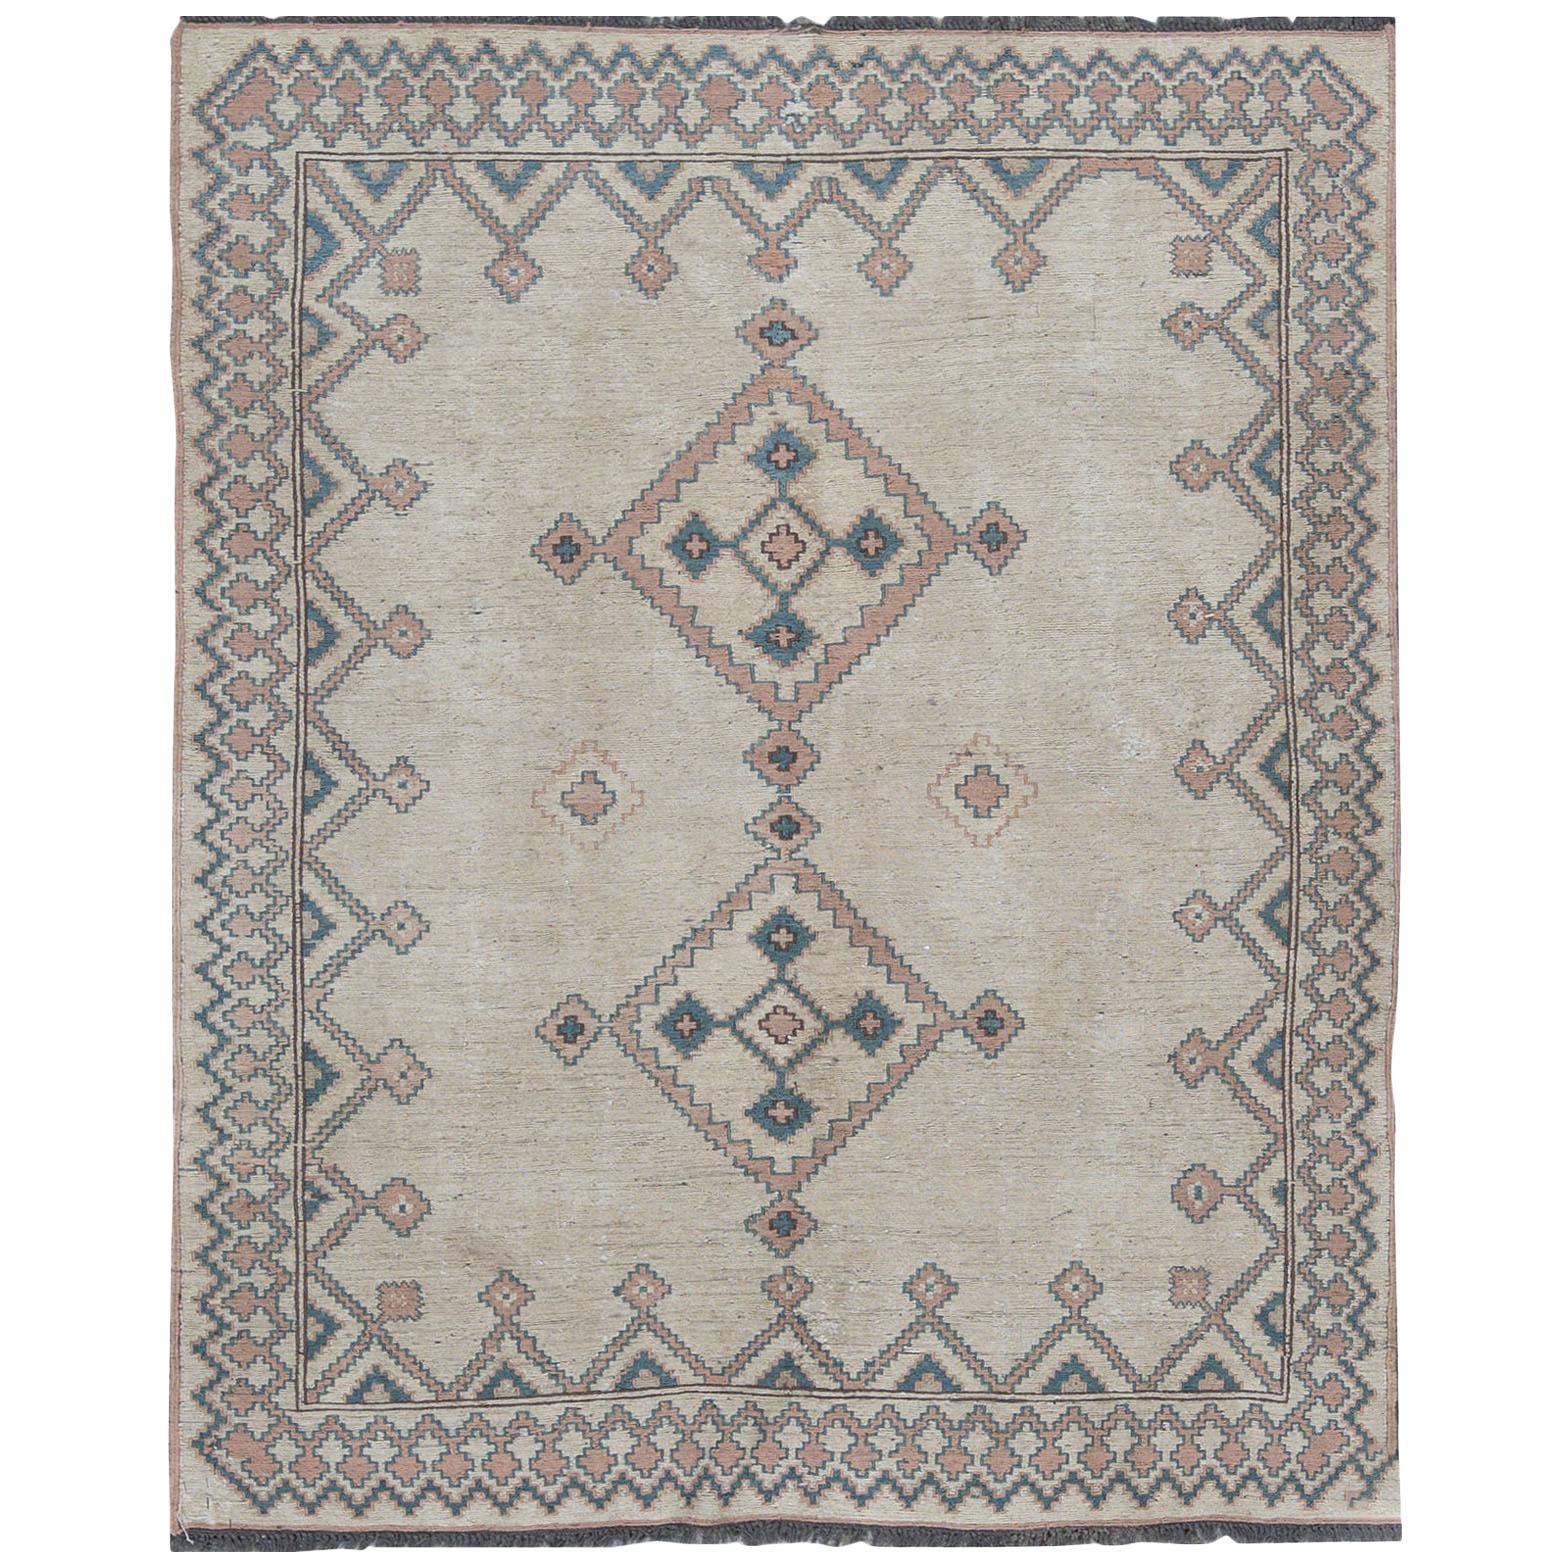 One-of-a-Kind Traditional Handwoven Antique Style Wool Area Rug  4’10" x 5’10”. For Sale